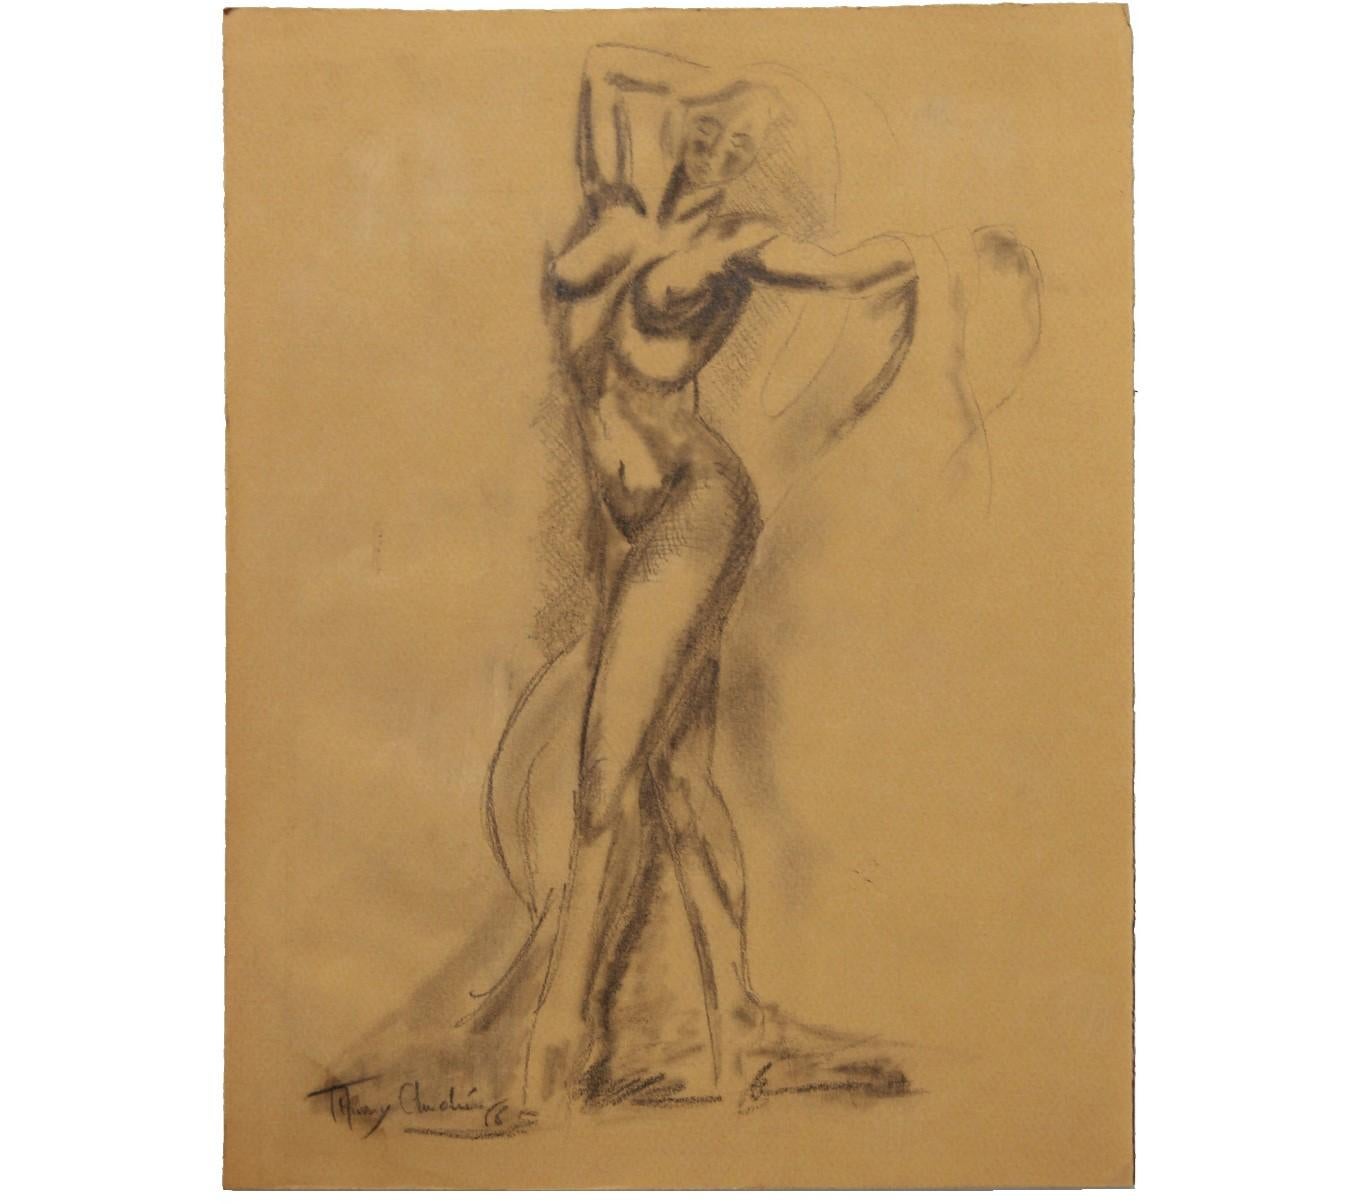 Thierry Andre Figurative Art - Dancing Figurative Study of a Nude Woman